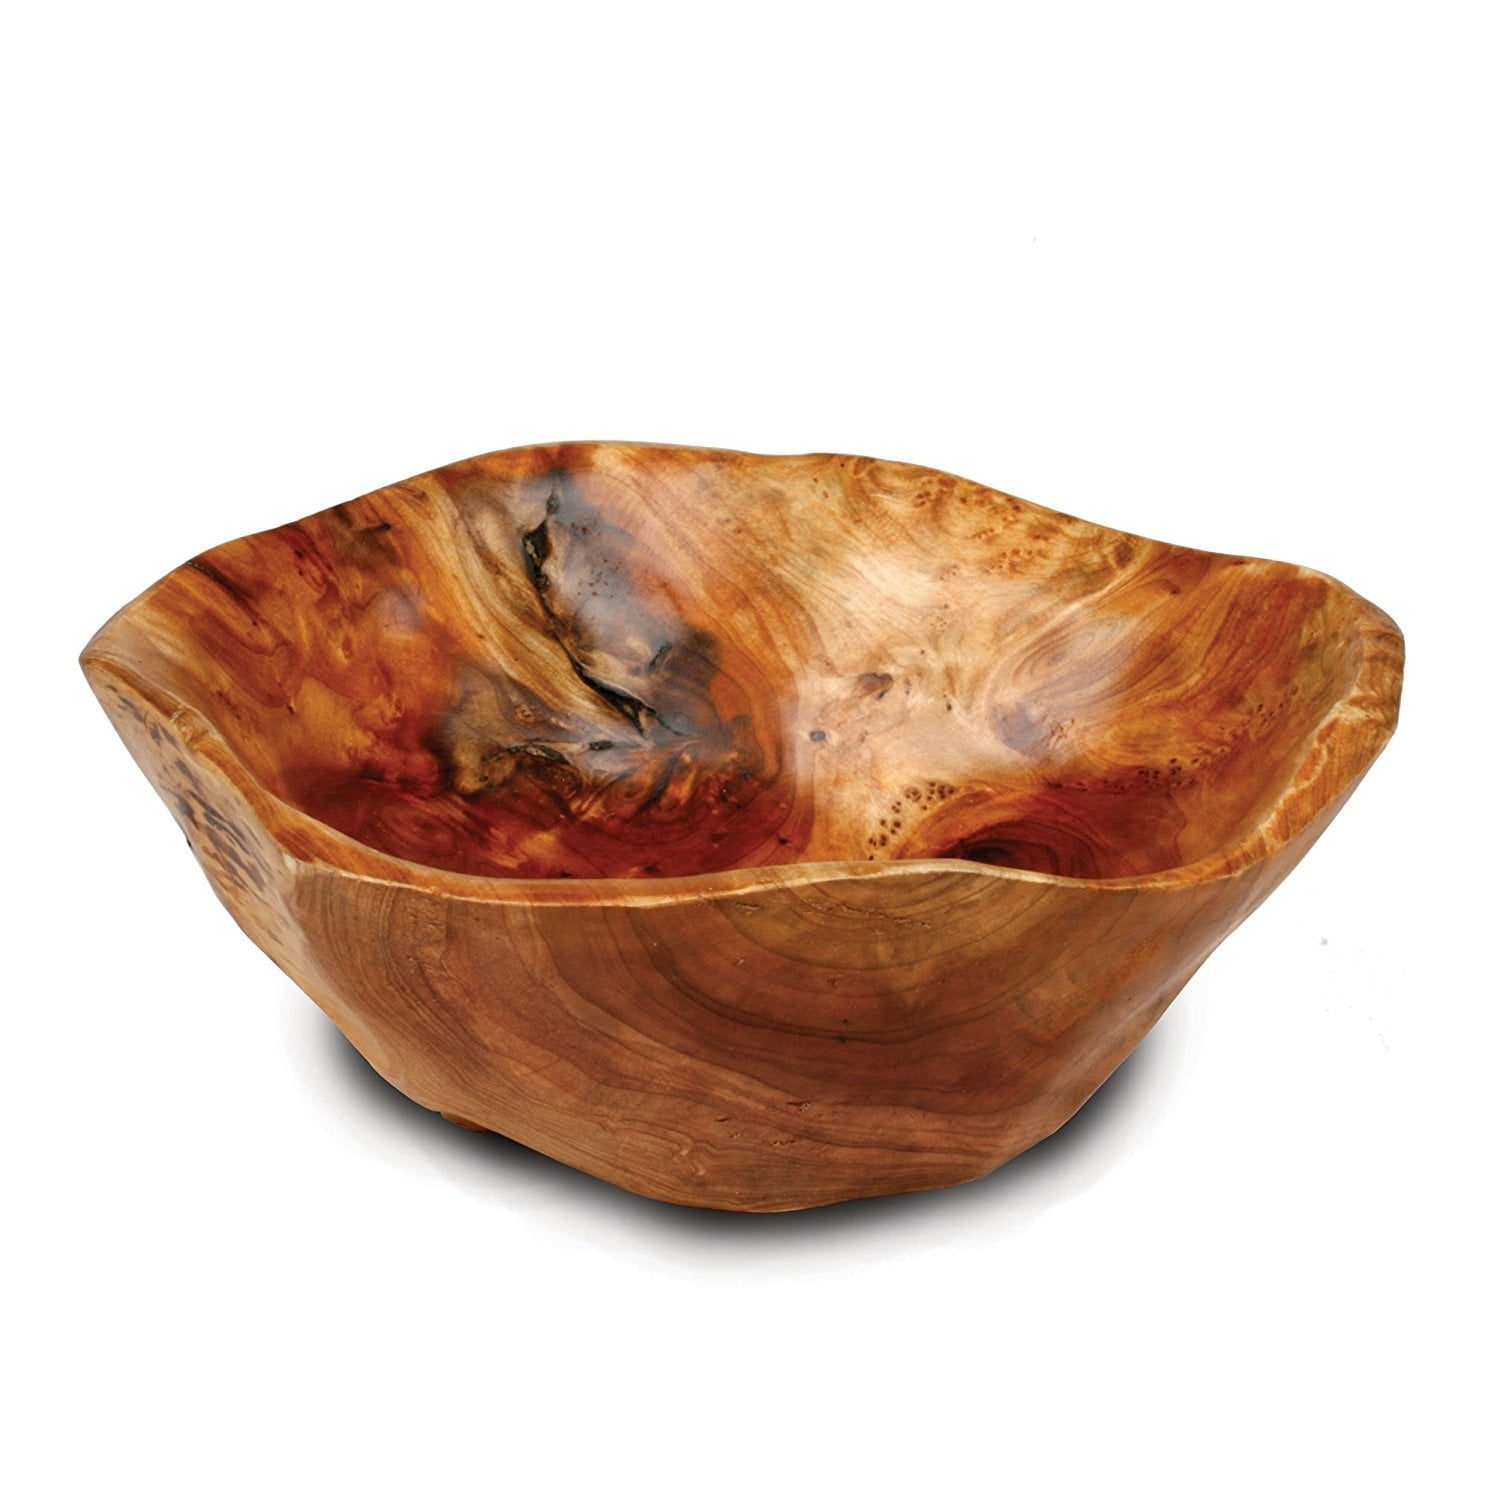 100 % Natural Wood Details about   Wooden Bowl 